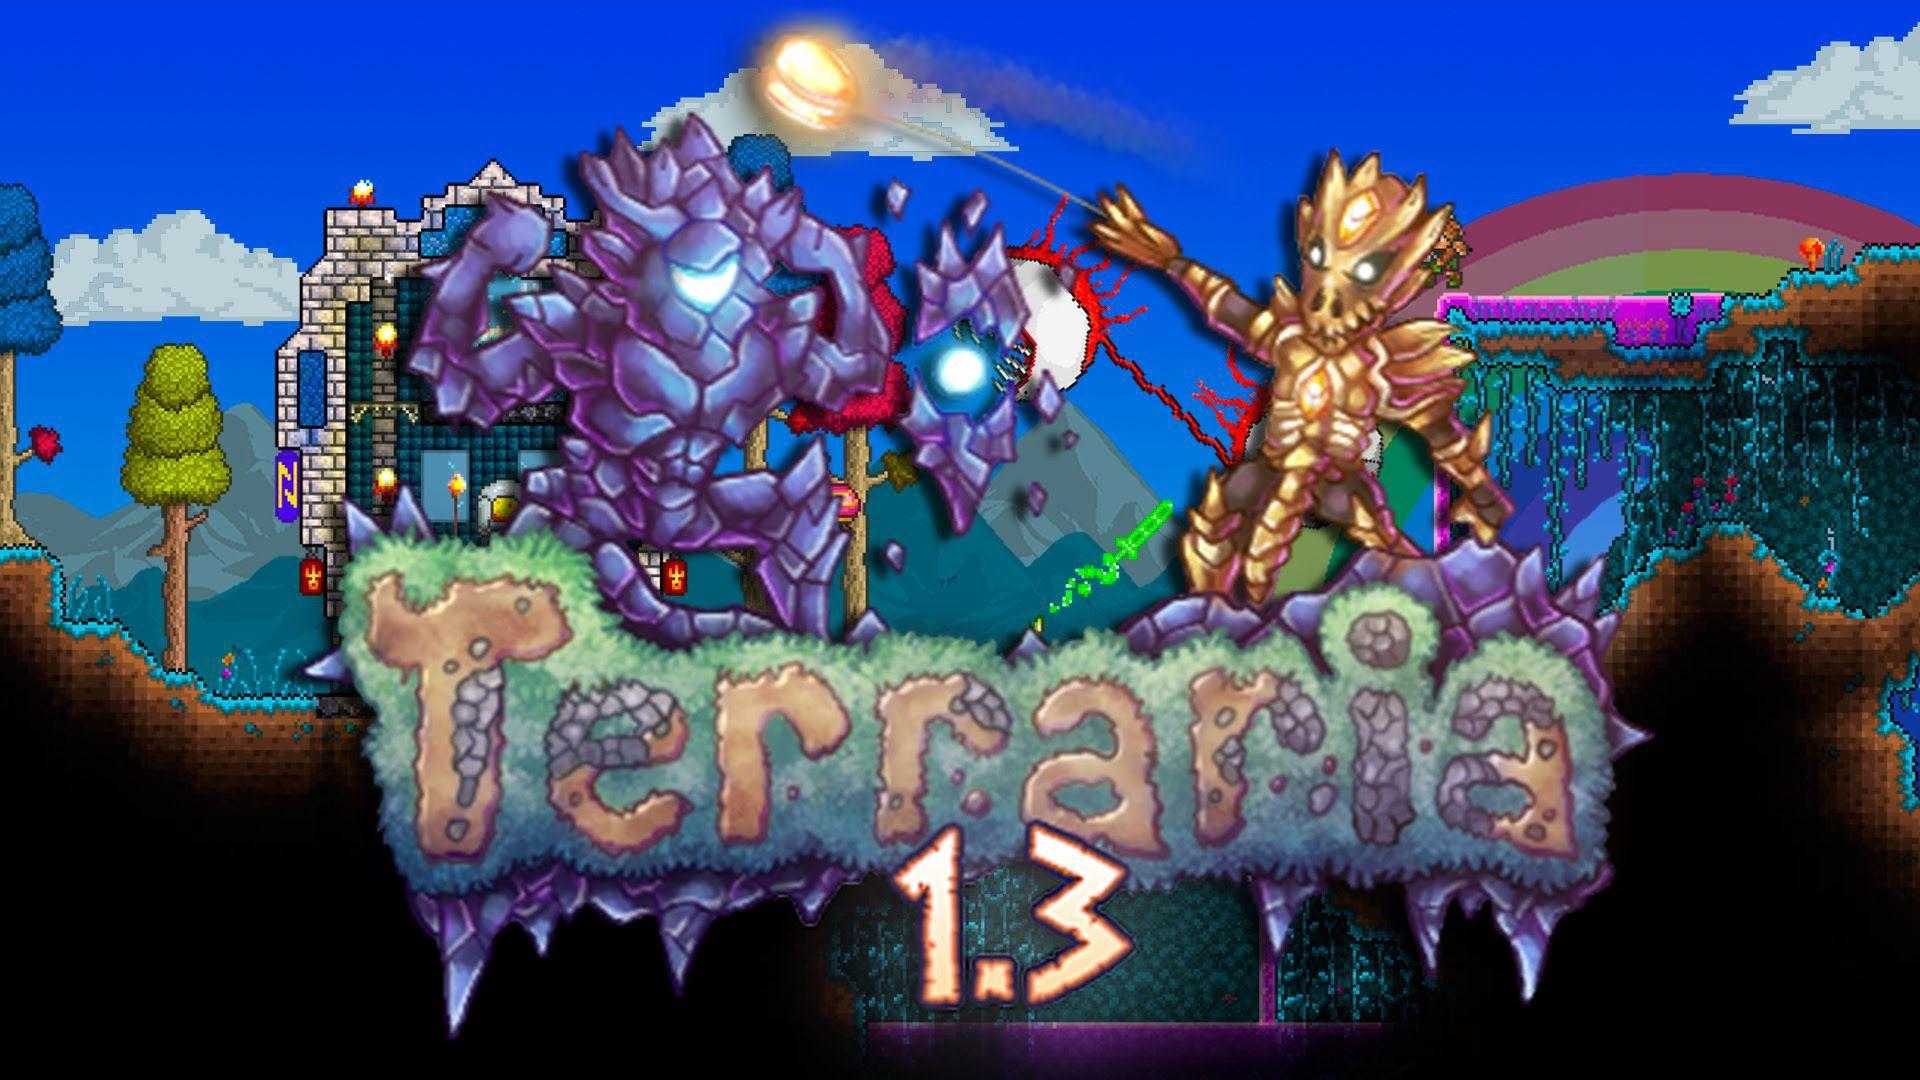 Terraria 1.3 Launches with over 800 new items!